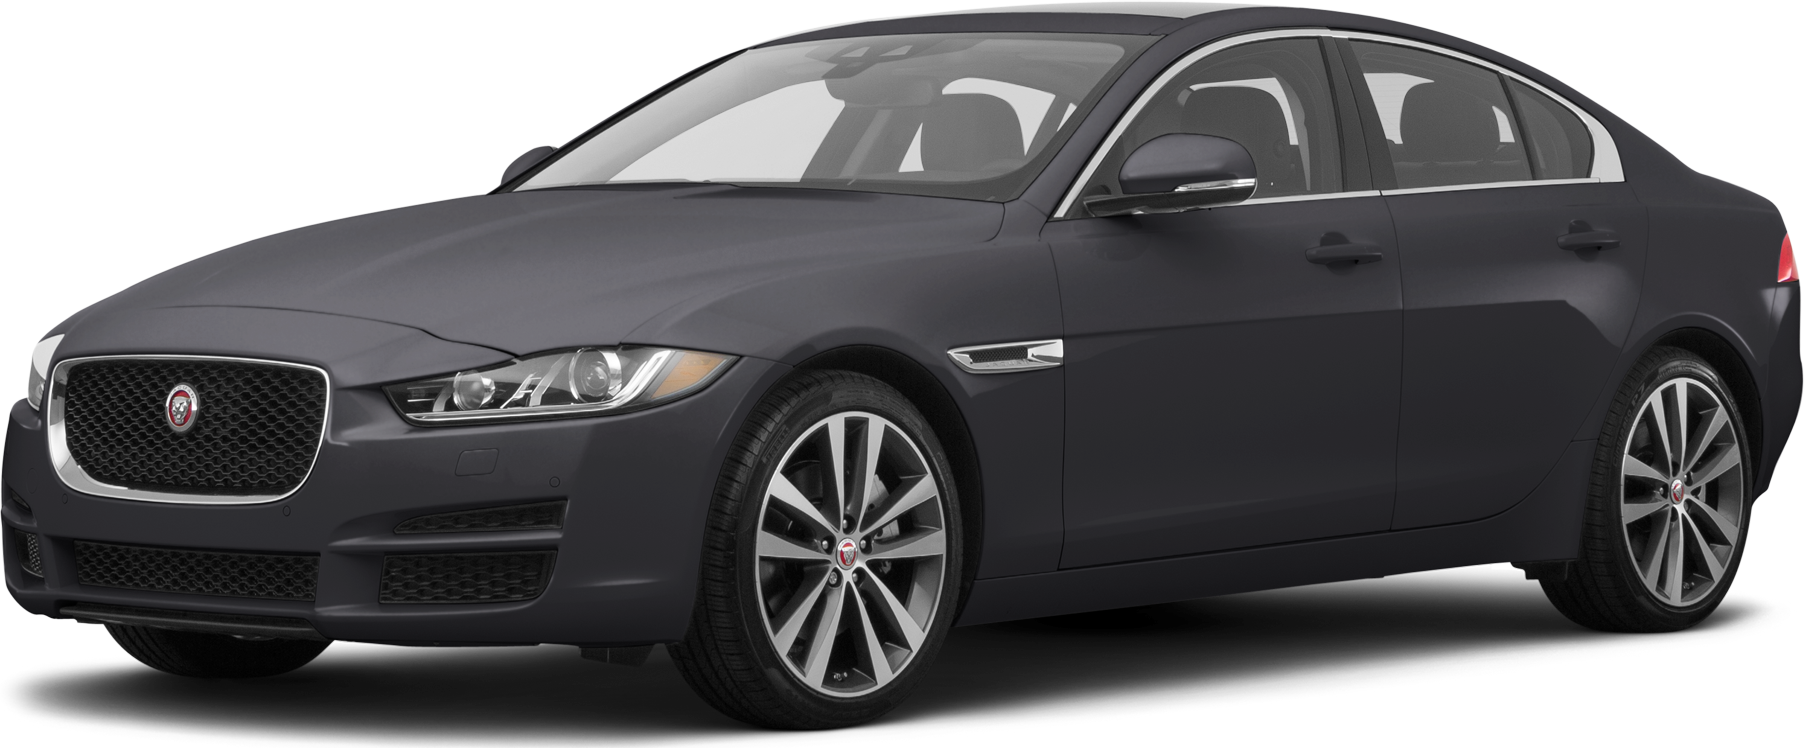 Here's Proof That A Coupe Jaguar XE Would Be Insanely Hot, News